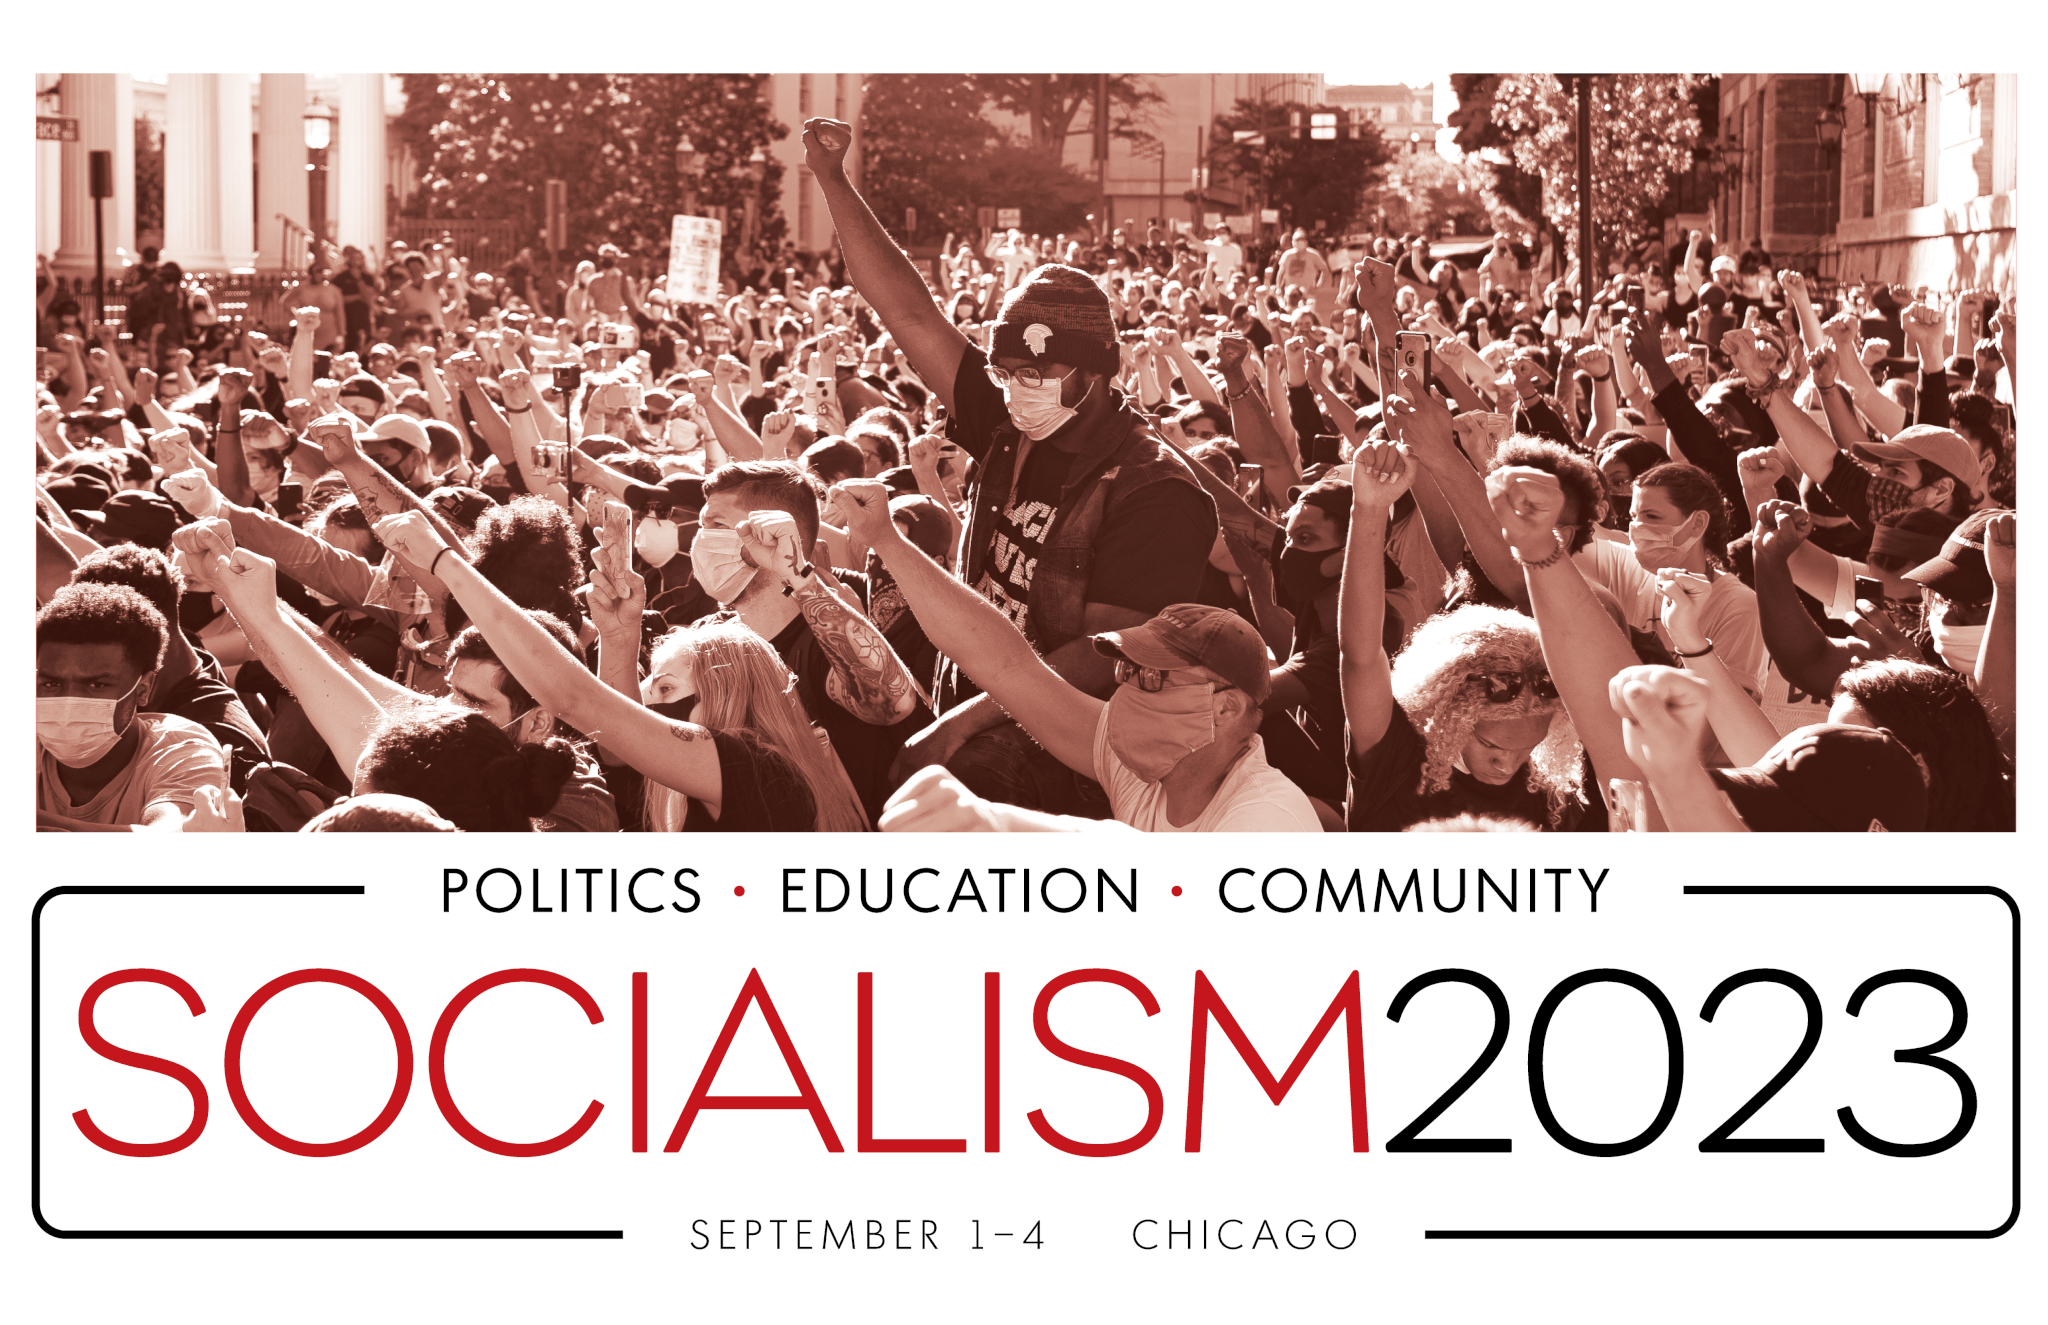 The Socialism 2023 Conference banner: September 1-4, Chicago. Politics, Education, Community. Featuring a photo of people standing at a protest with fists raised. 